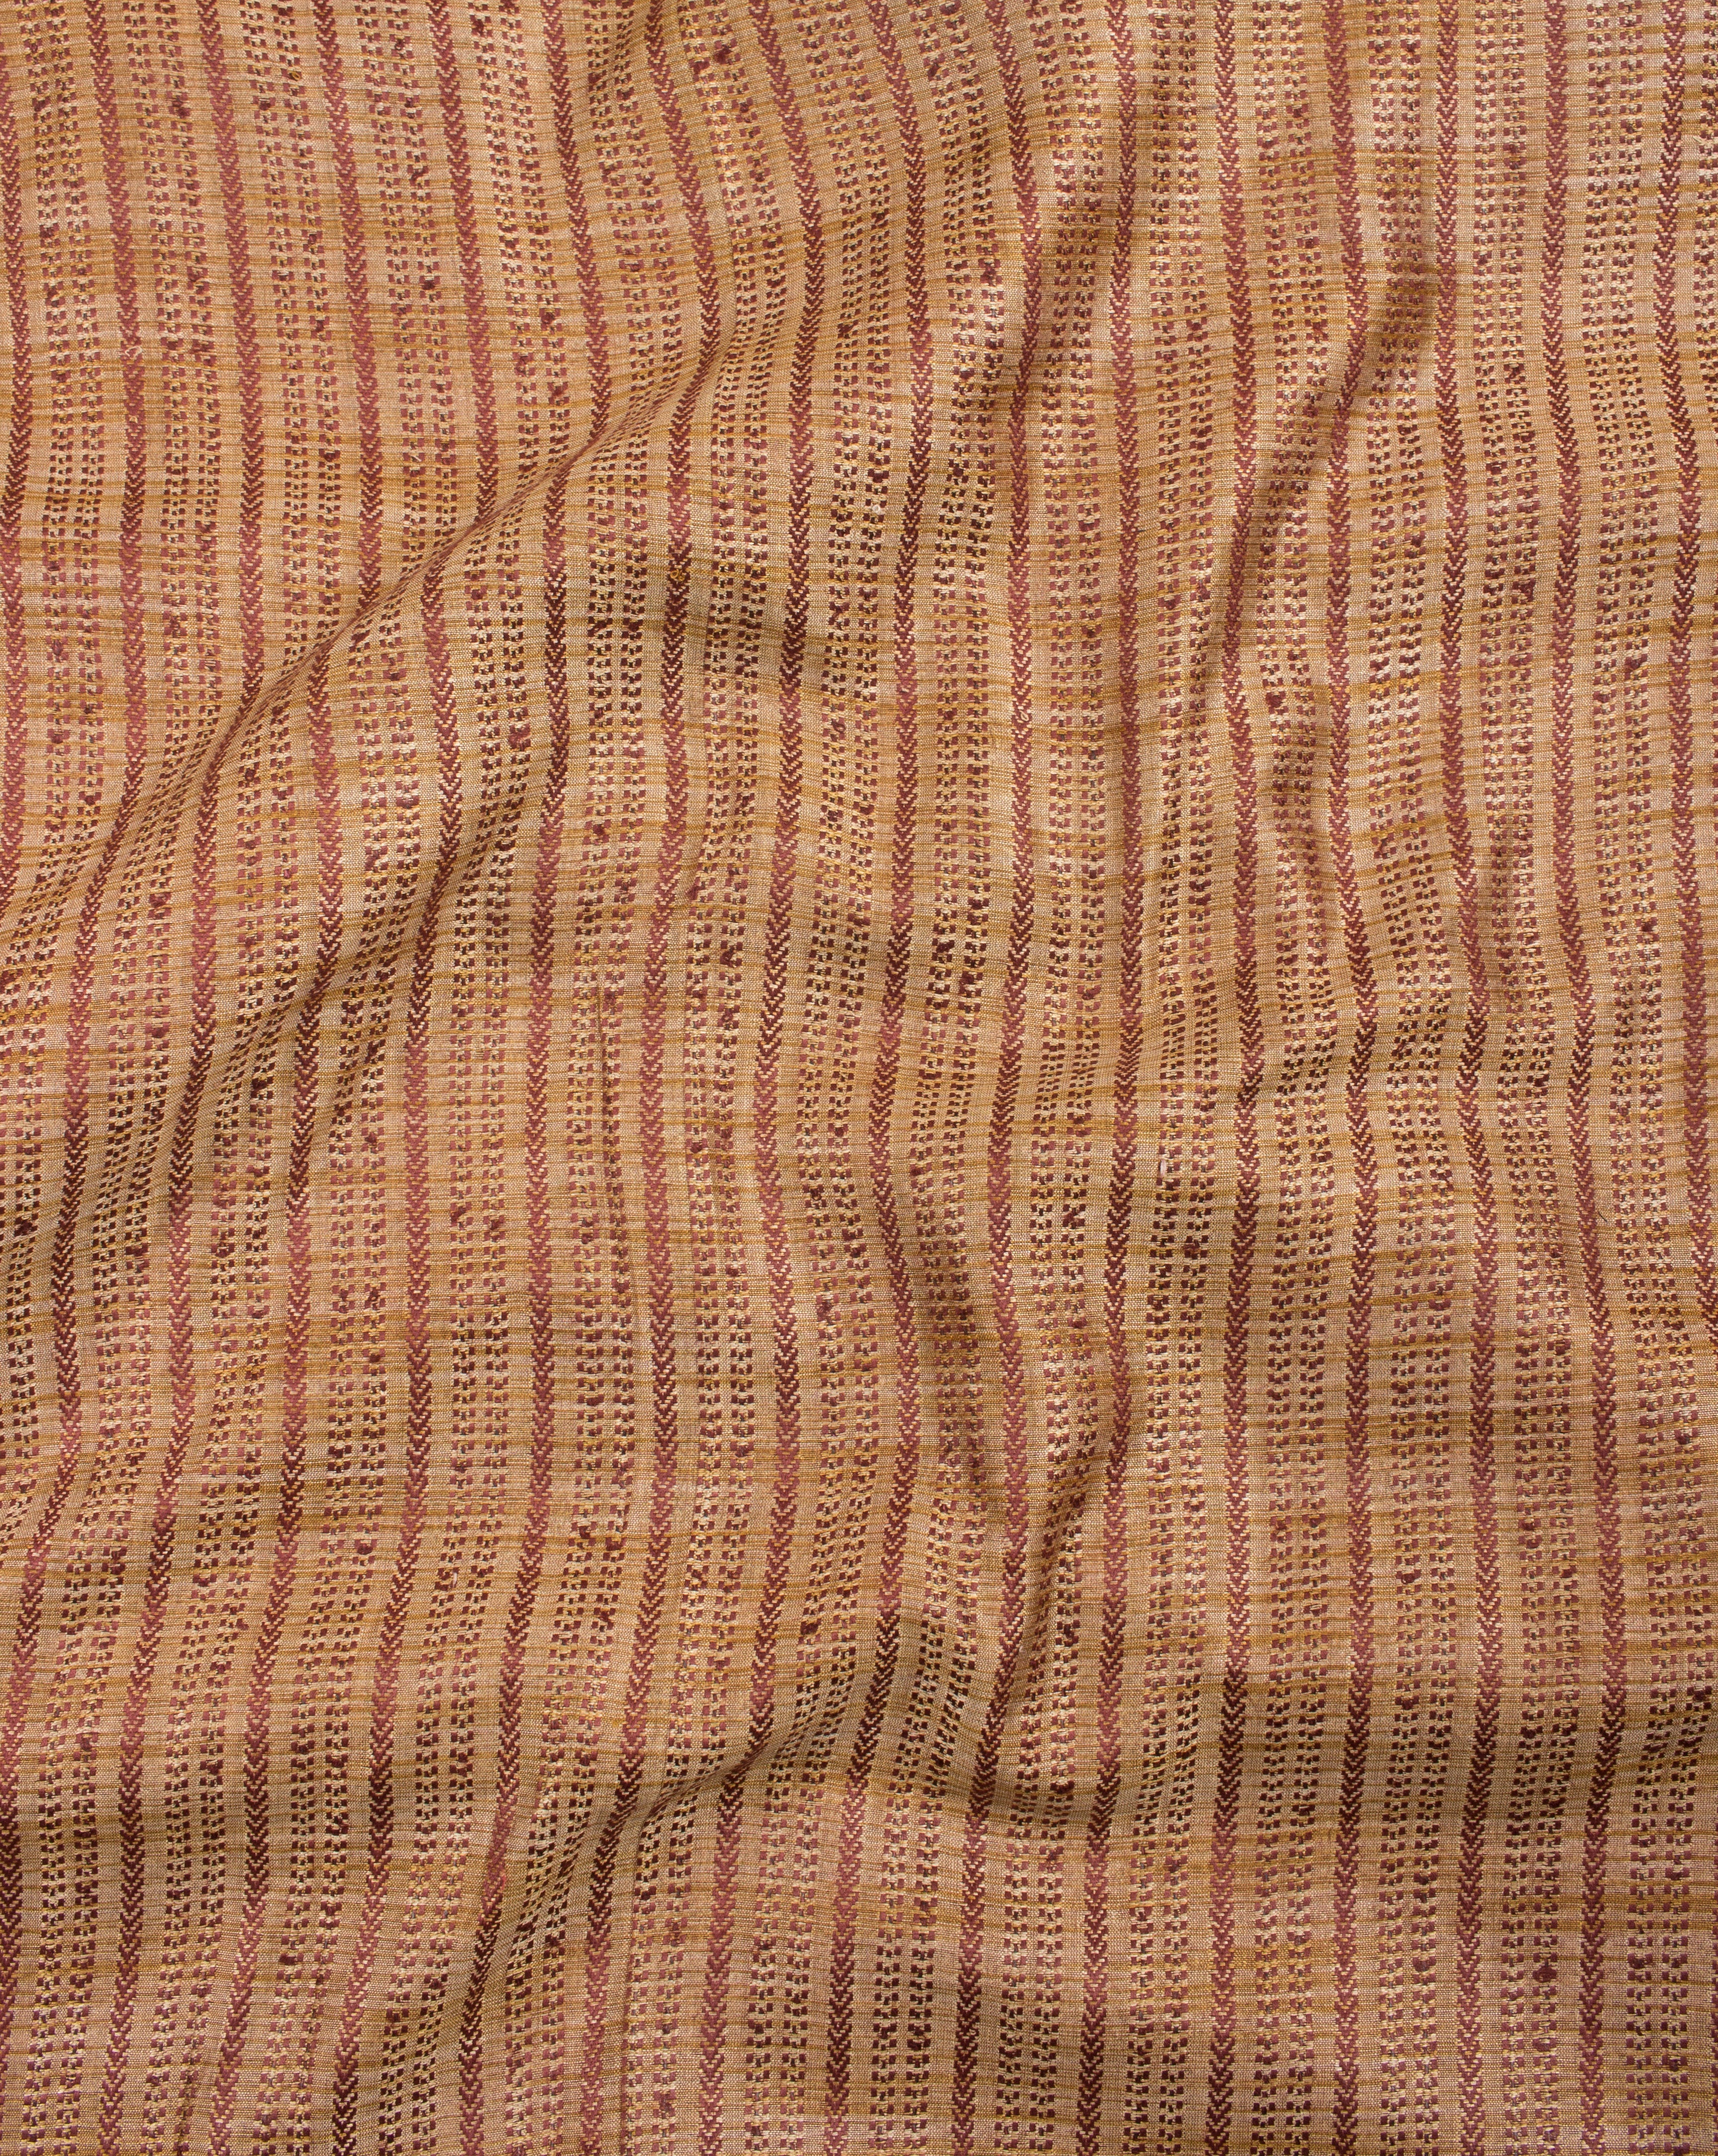 Maroon Gold Stripes Jacquard Blended Cotton Fabric - Fabriclore.com